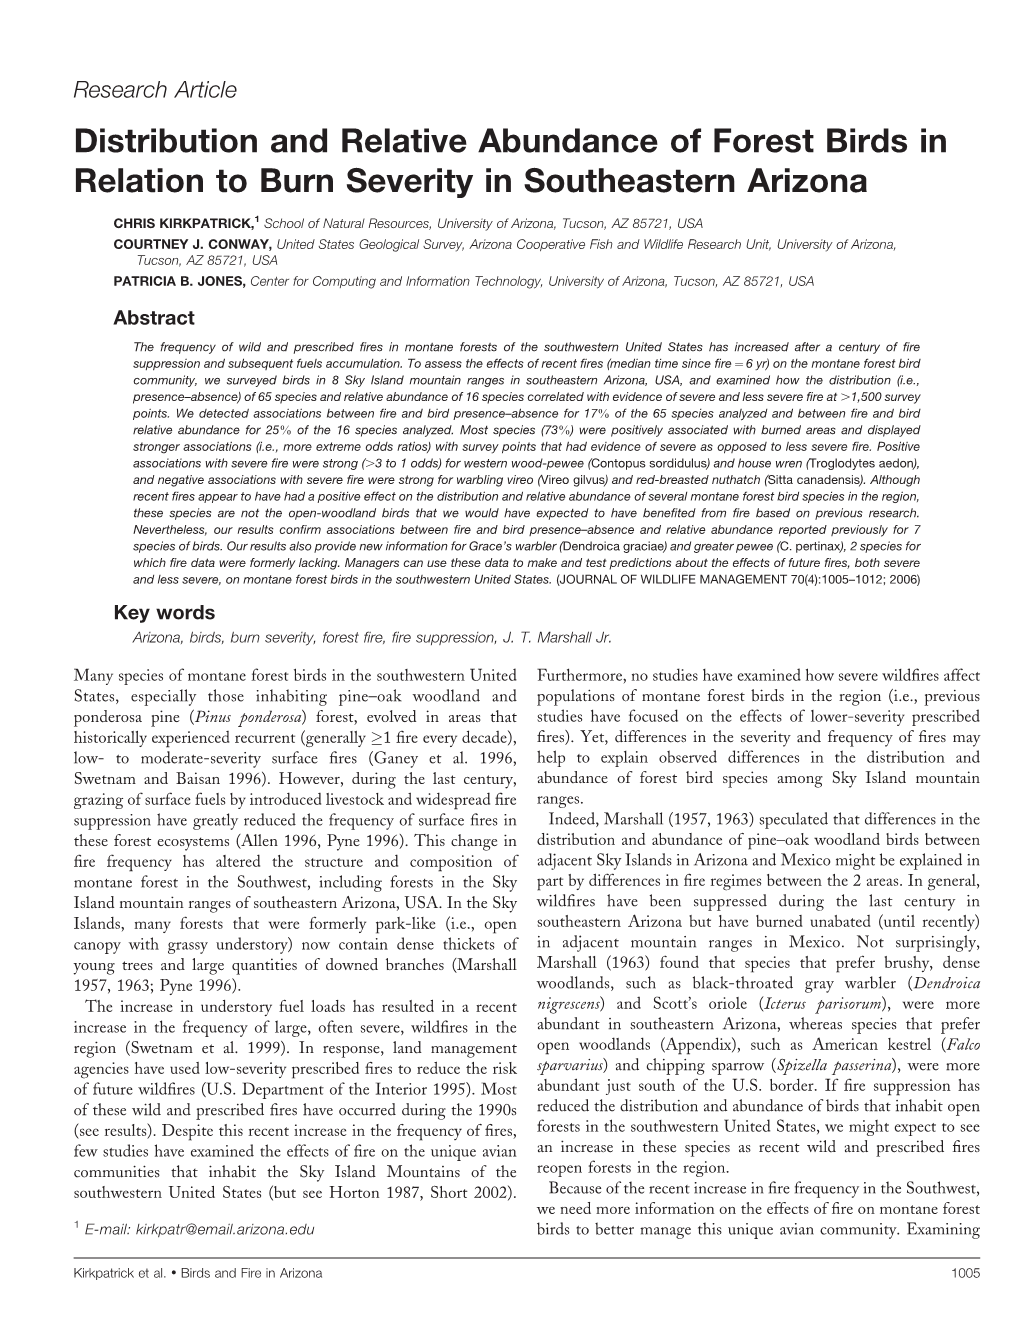 Distribution and Relative Abundance of Forest Birds in Relation to Burn Severity in Southeastern Arizona